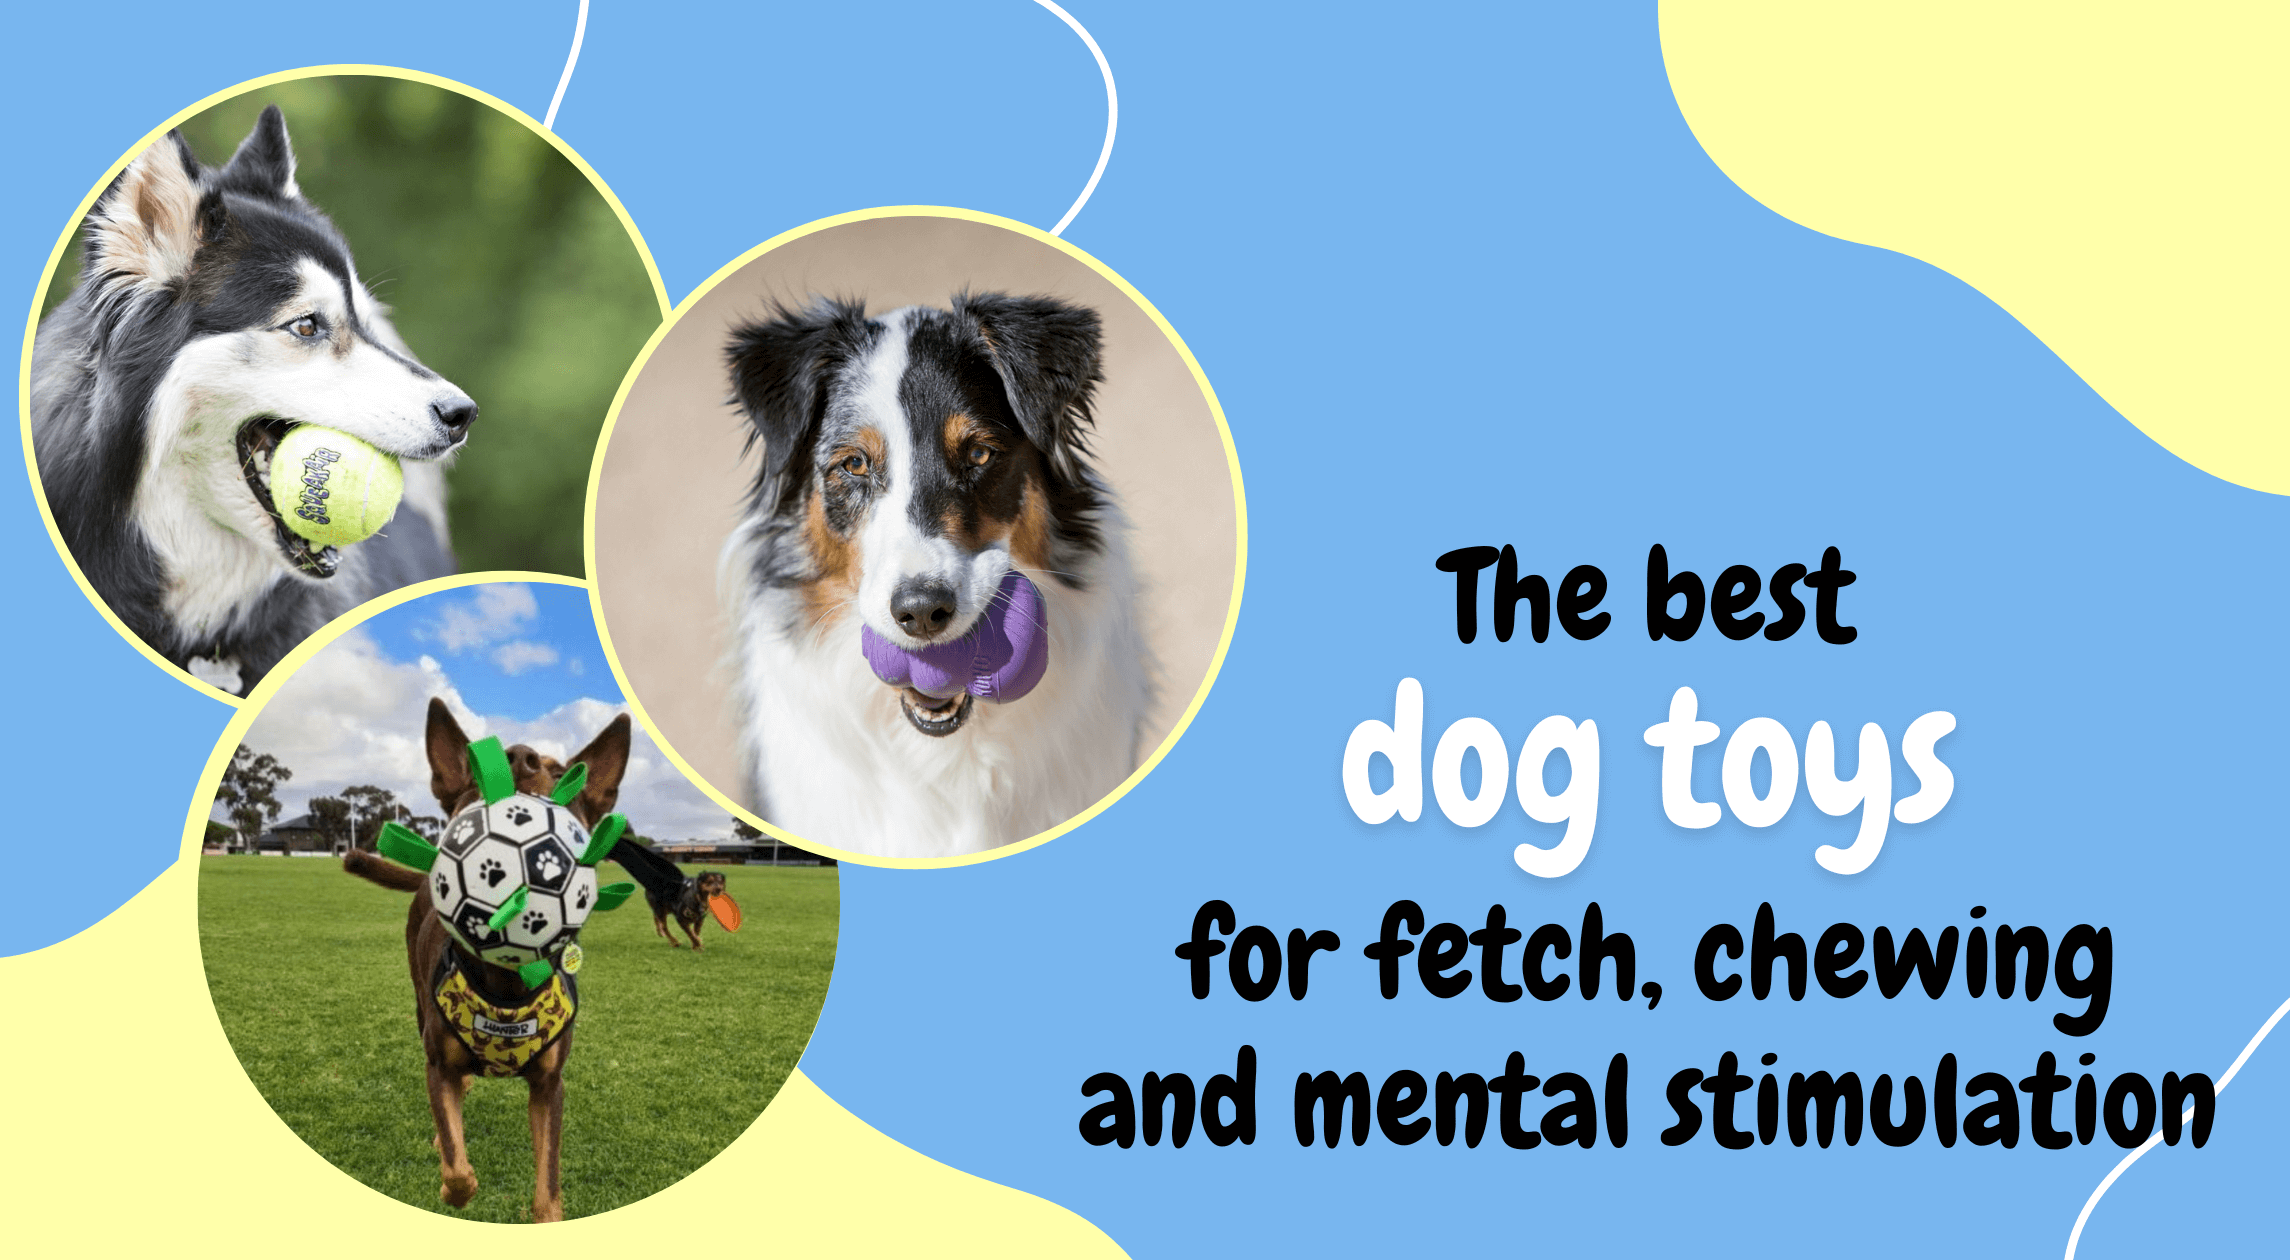 The best dog toys for fetch, chewing and mental stimulation